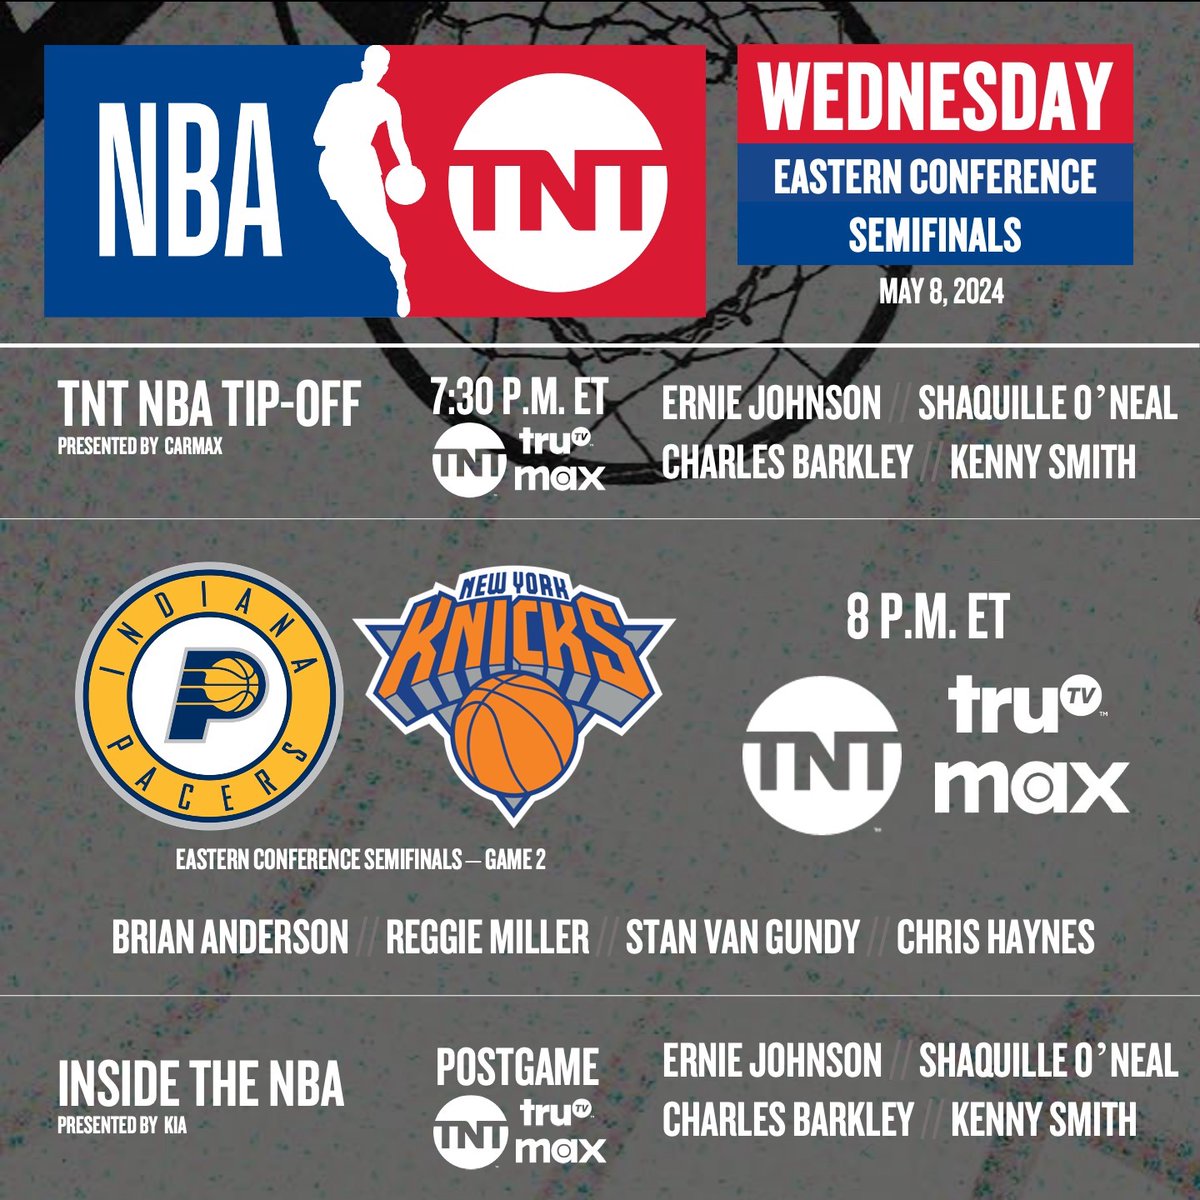 The stage is set for an electrifying showdown between the Indiana Pacers and the New York Knicks! Catch every moment of the action starting at 7:30 PM ET on @NBAonTNT and @SportsonMax! 🏀 #NBAPlayoffs